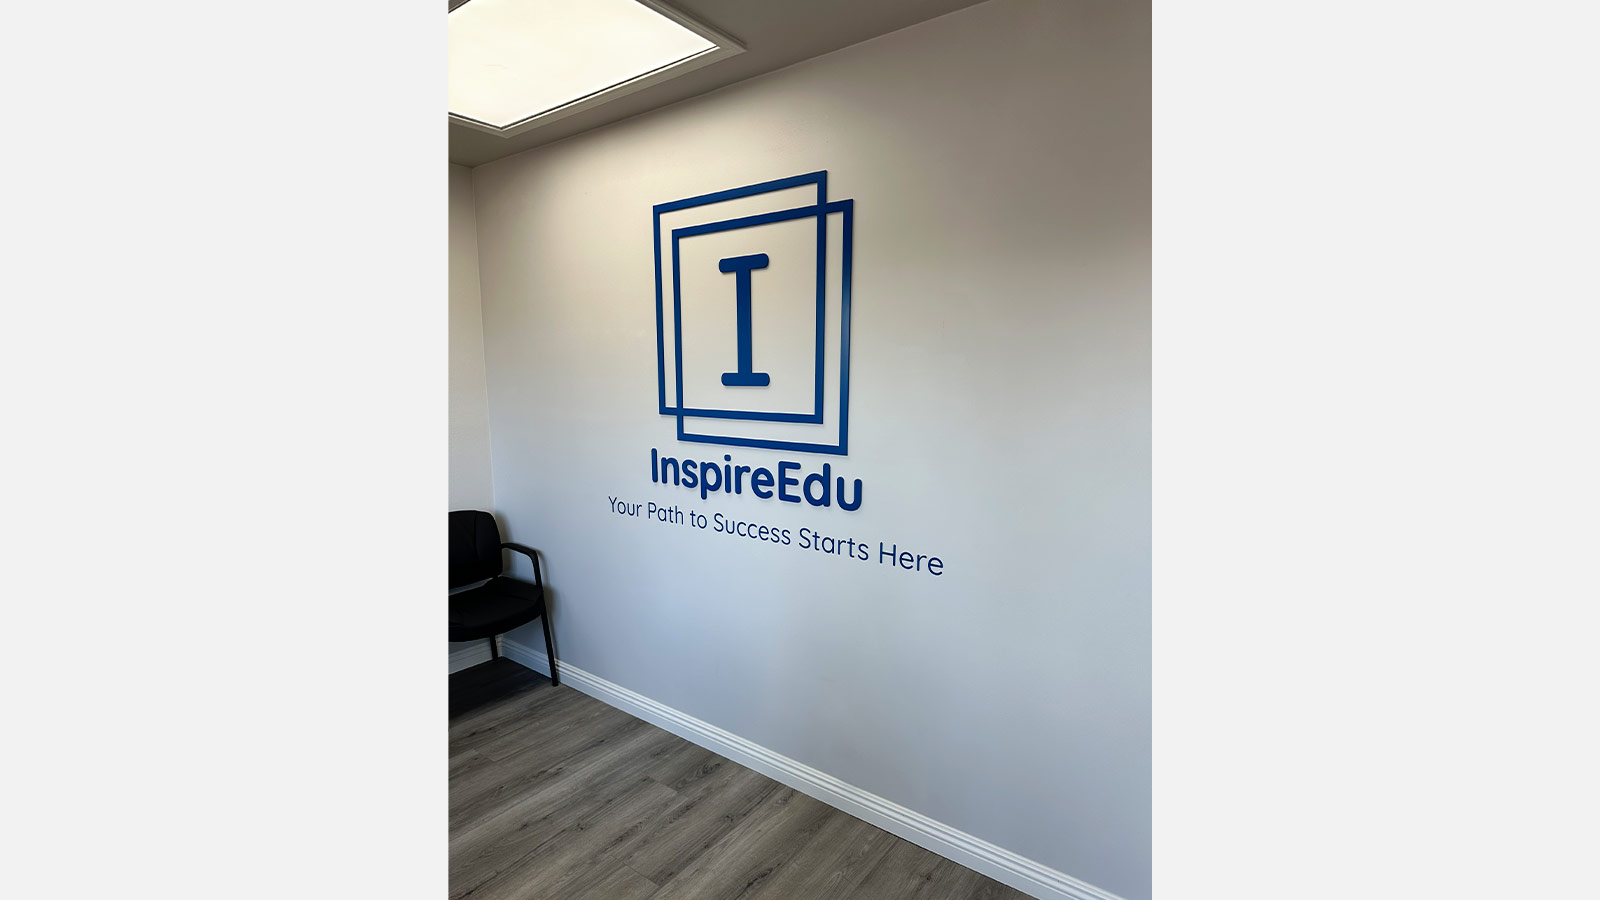 InspireEdu Consulting interior signs applied to office wall